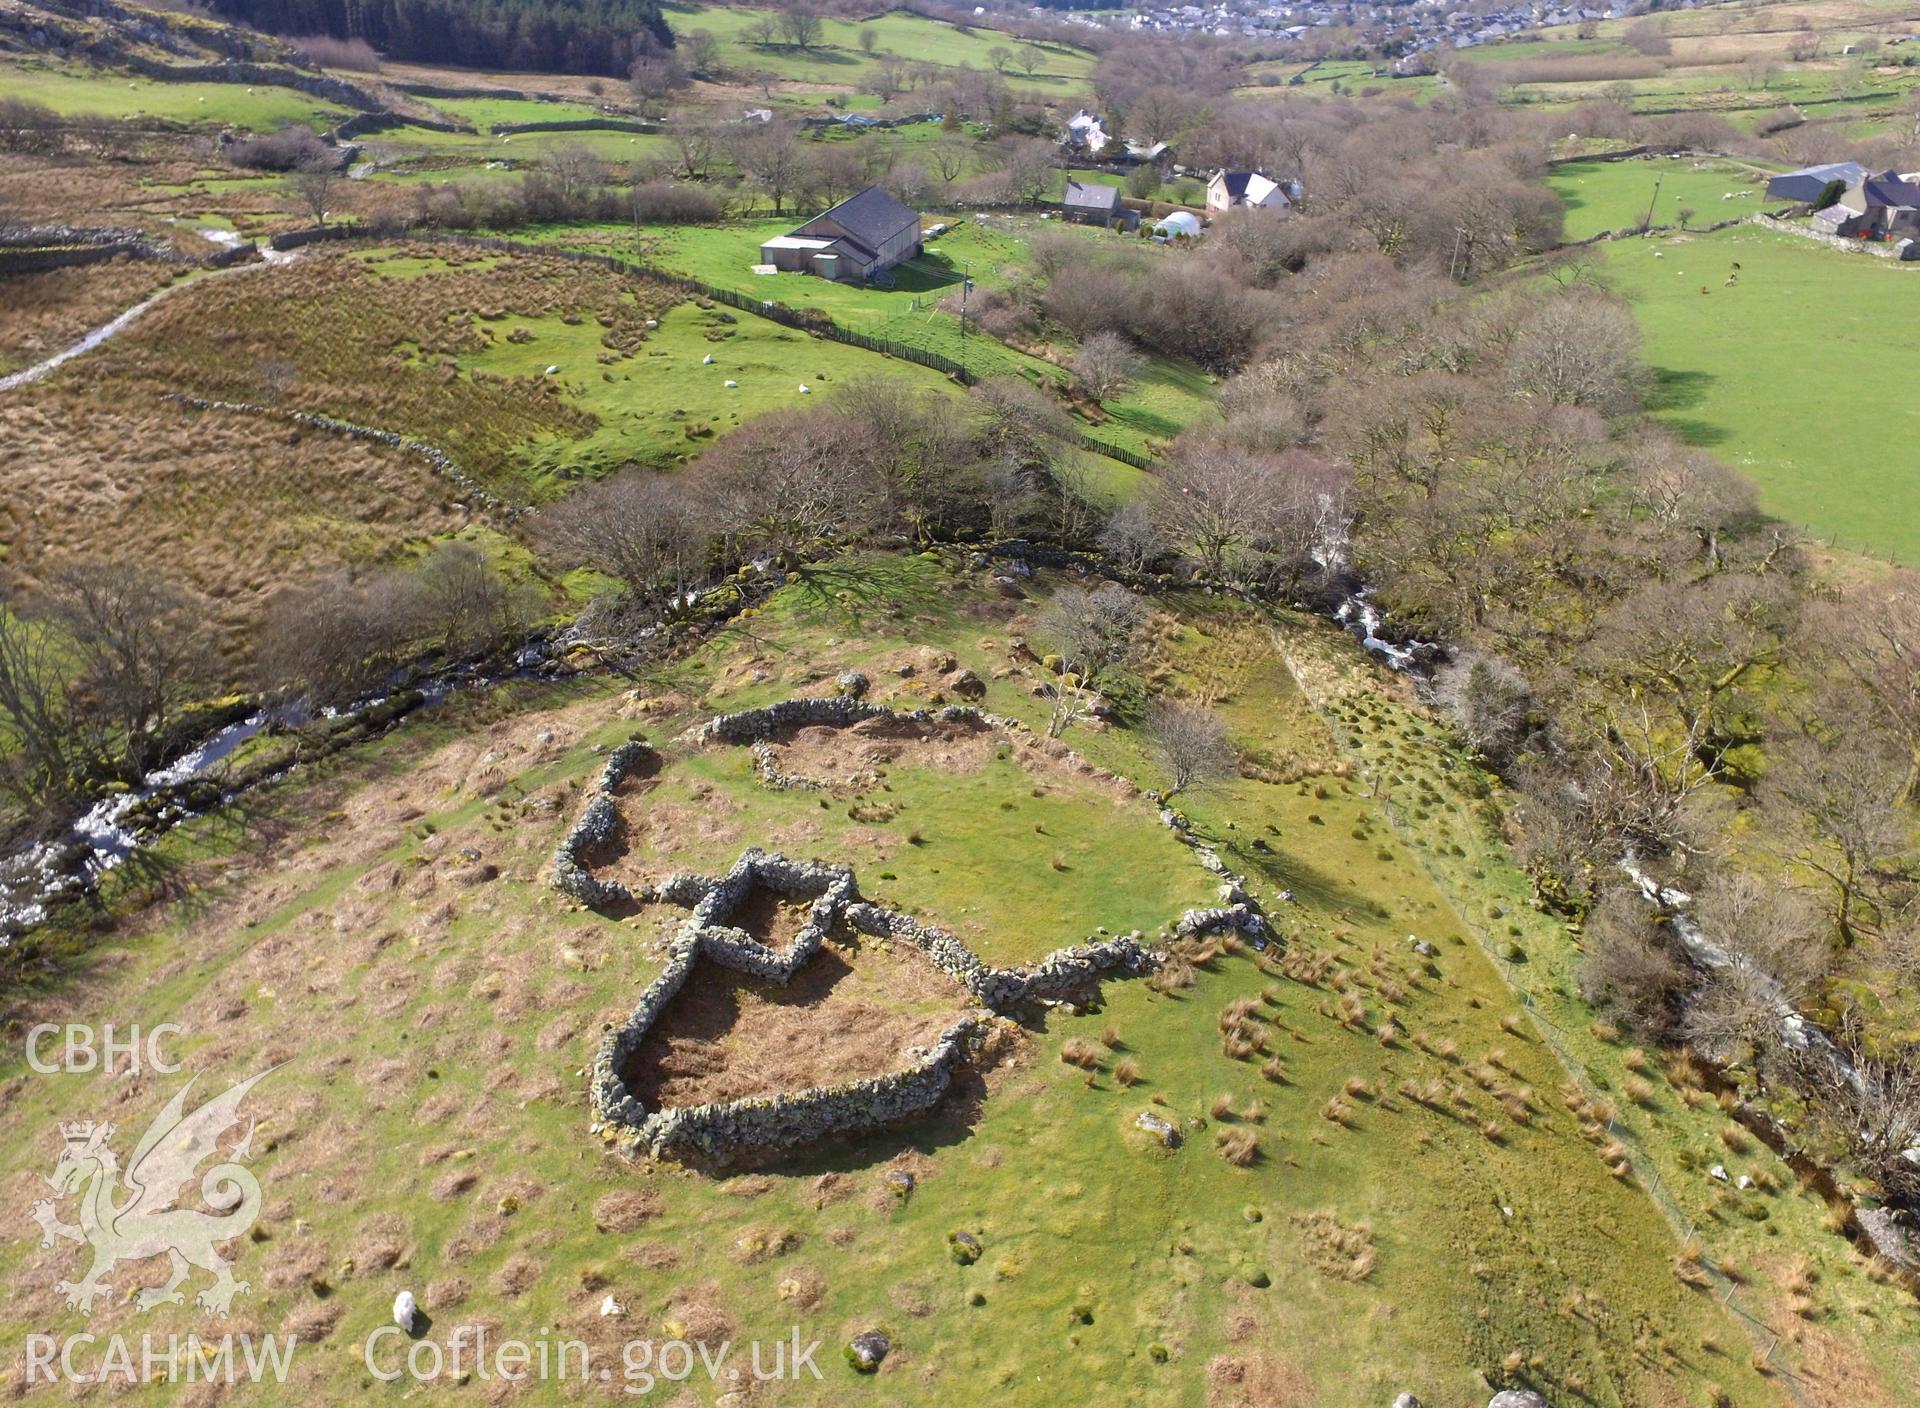 Colour photo showing aerial view of the ruins of Gwernsaeson-Fawr house, Bethesda, taken by Paul R. Davis, 18th April 2018.